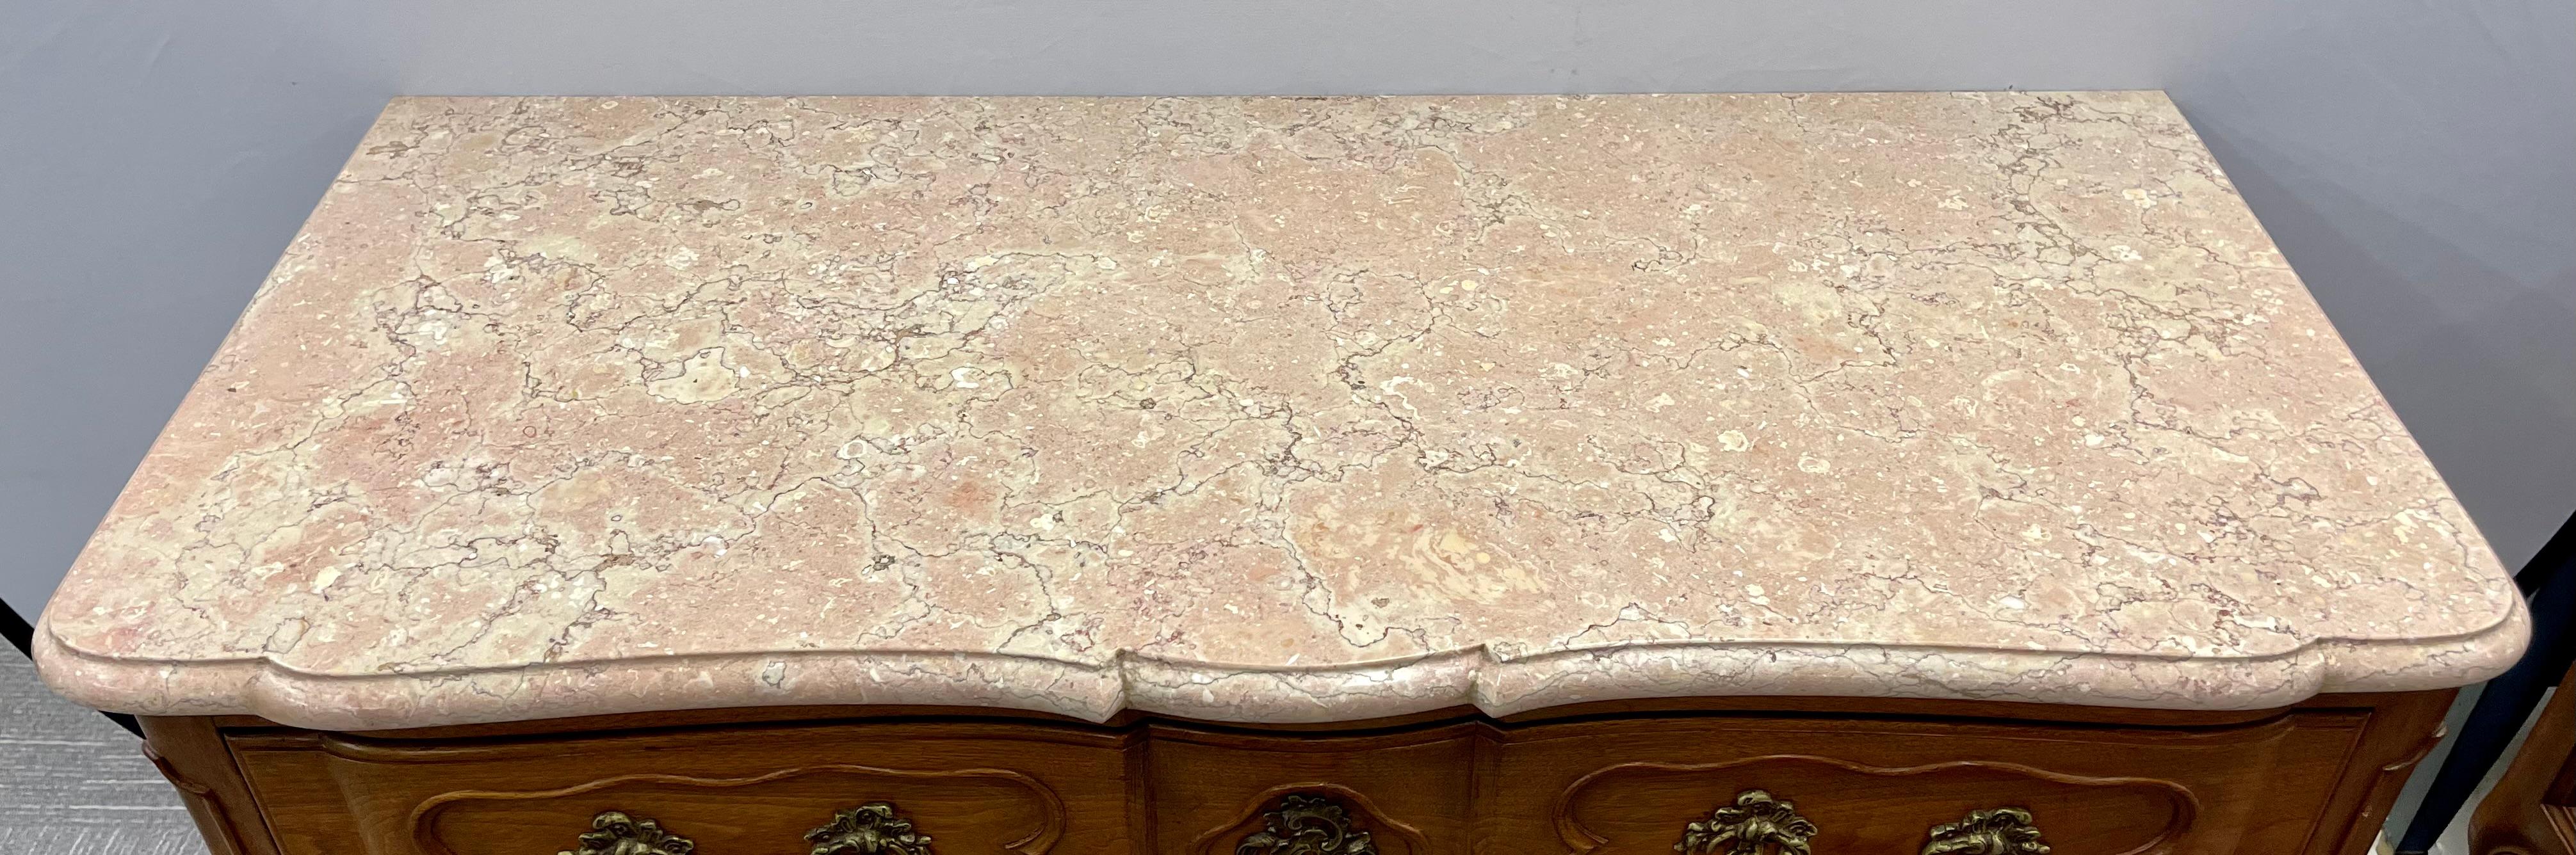 Pair of Marble-Top Louis XV Style Commodes Chests Attributed to Maison Jansen For Sale 2